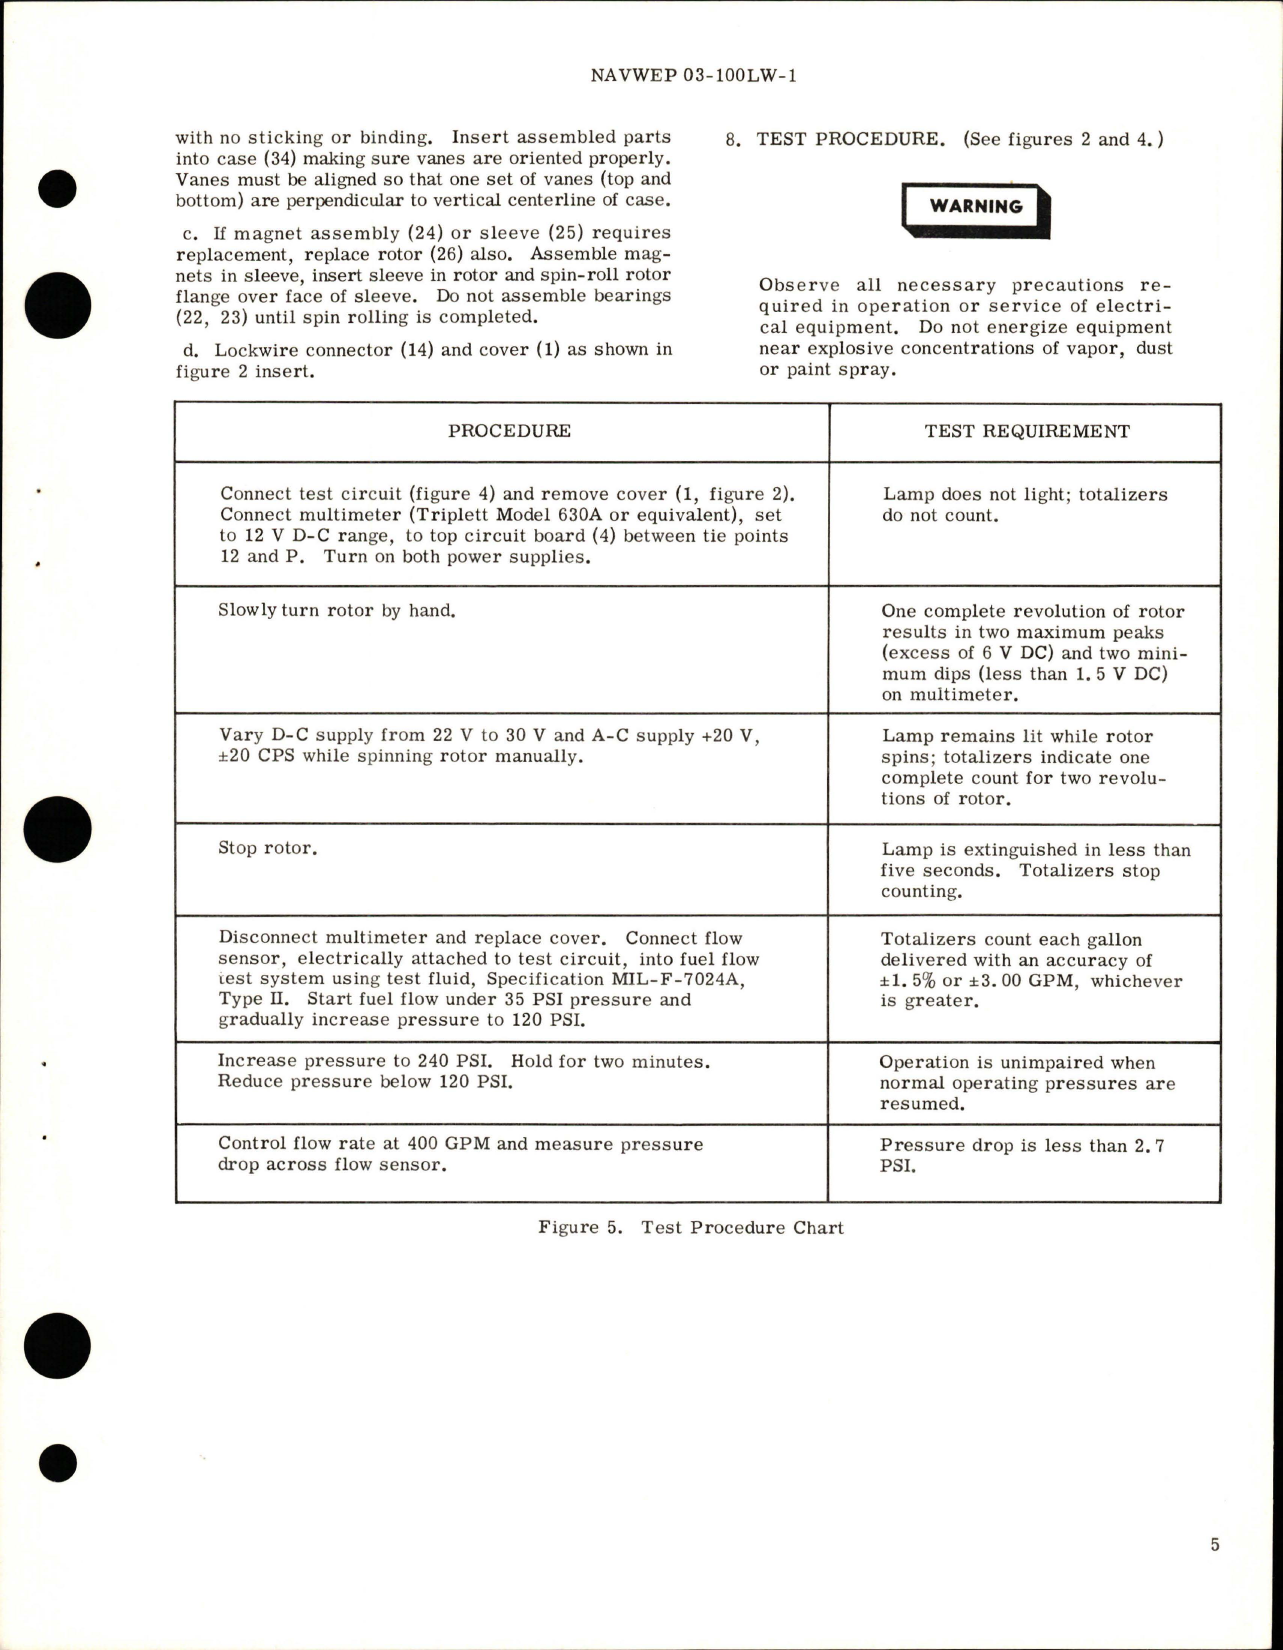 Sample page 5 from AirCorps Library document: Overhaul with Parts Breakdown for Flow Sensor - Part 1-0525